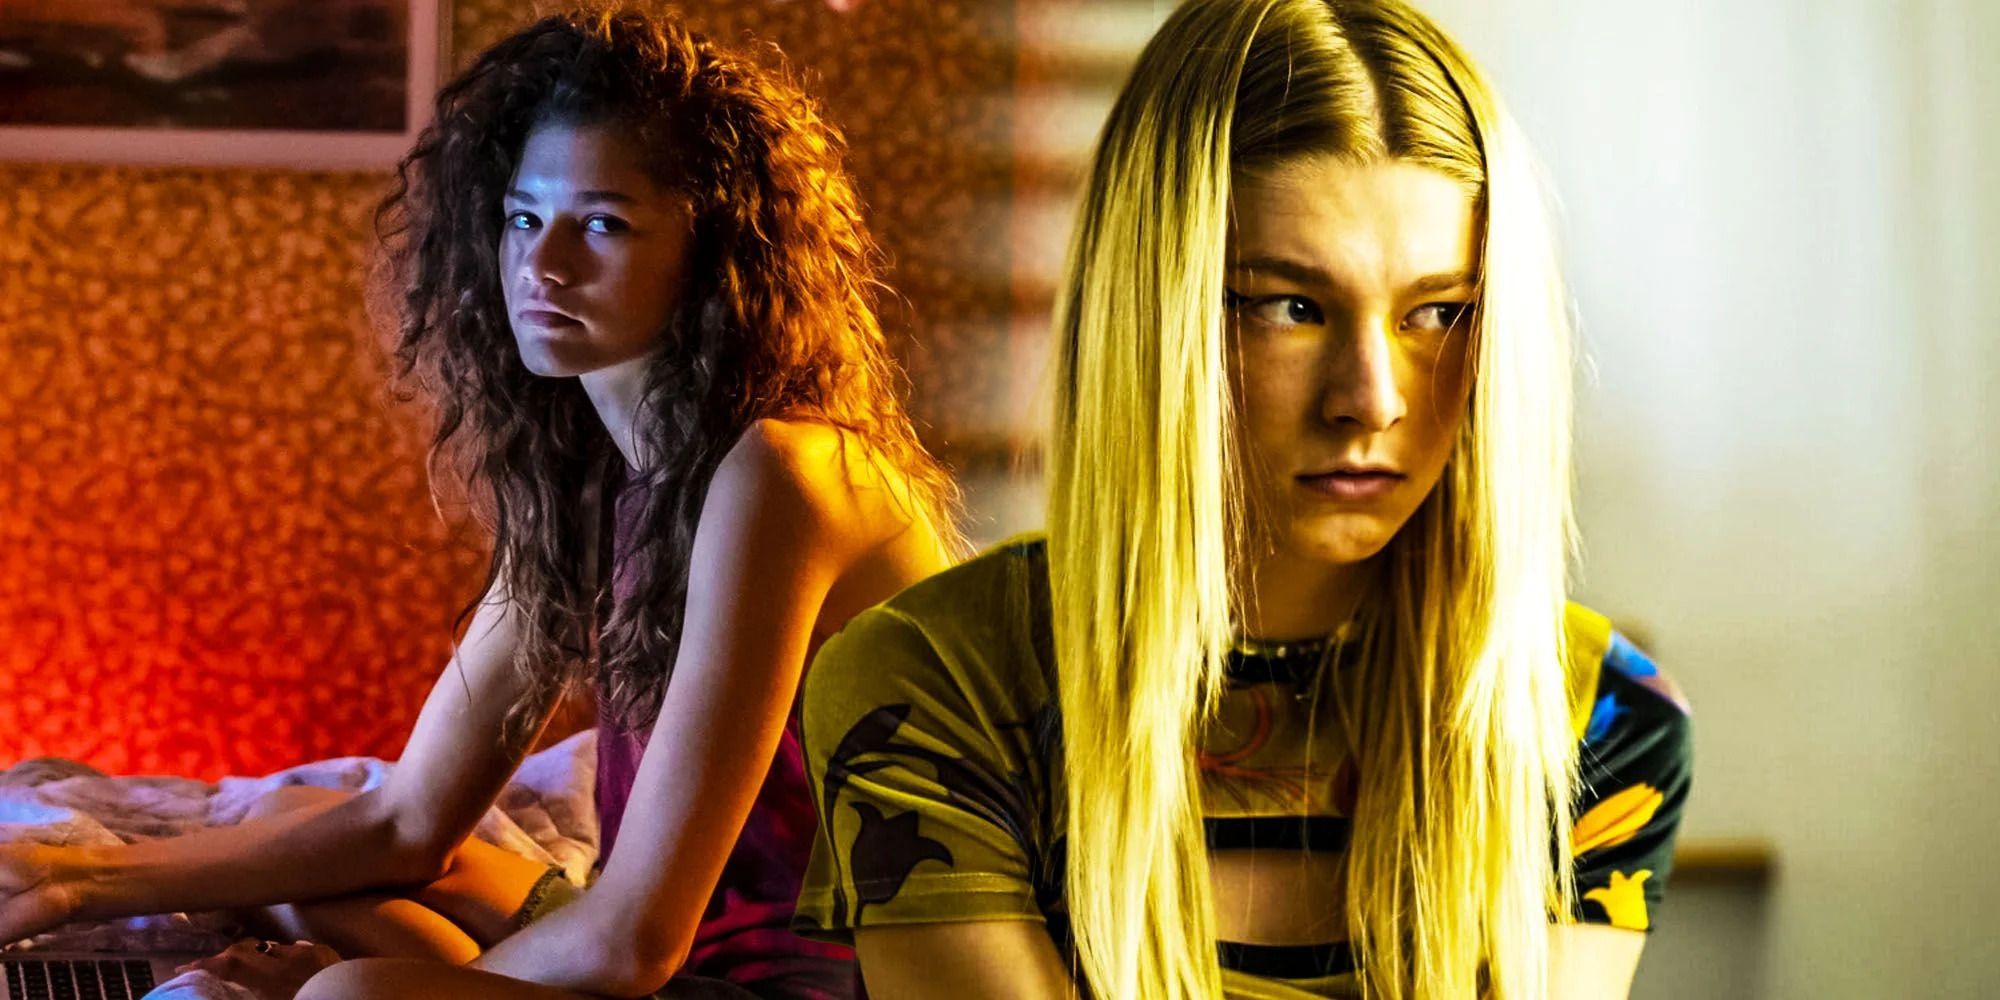 Rue and Jules looking sad, split image from Euphoria